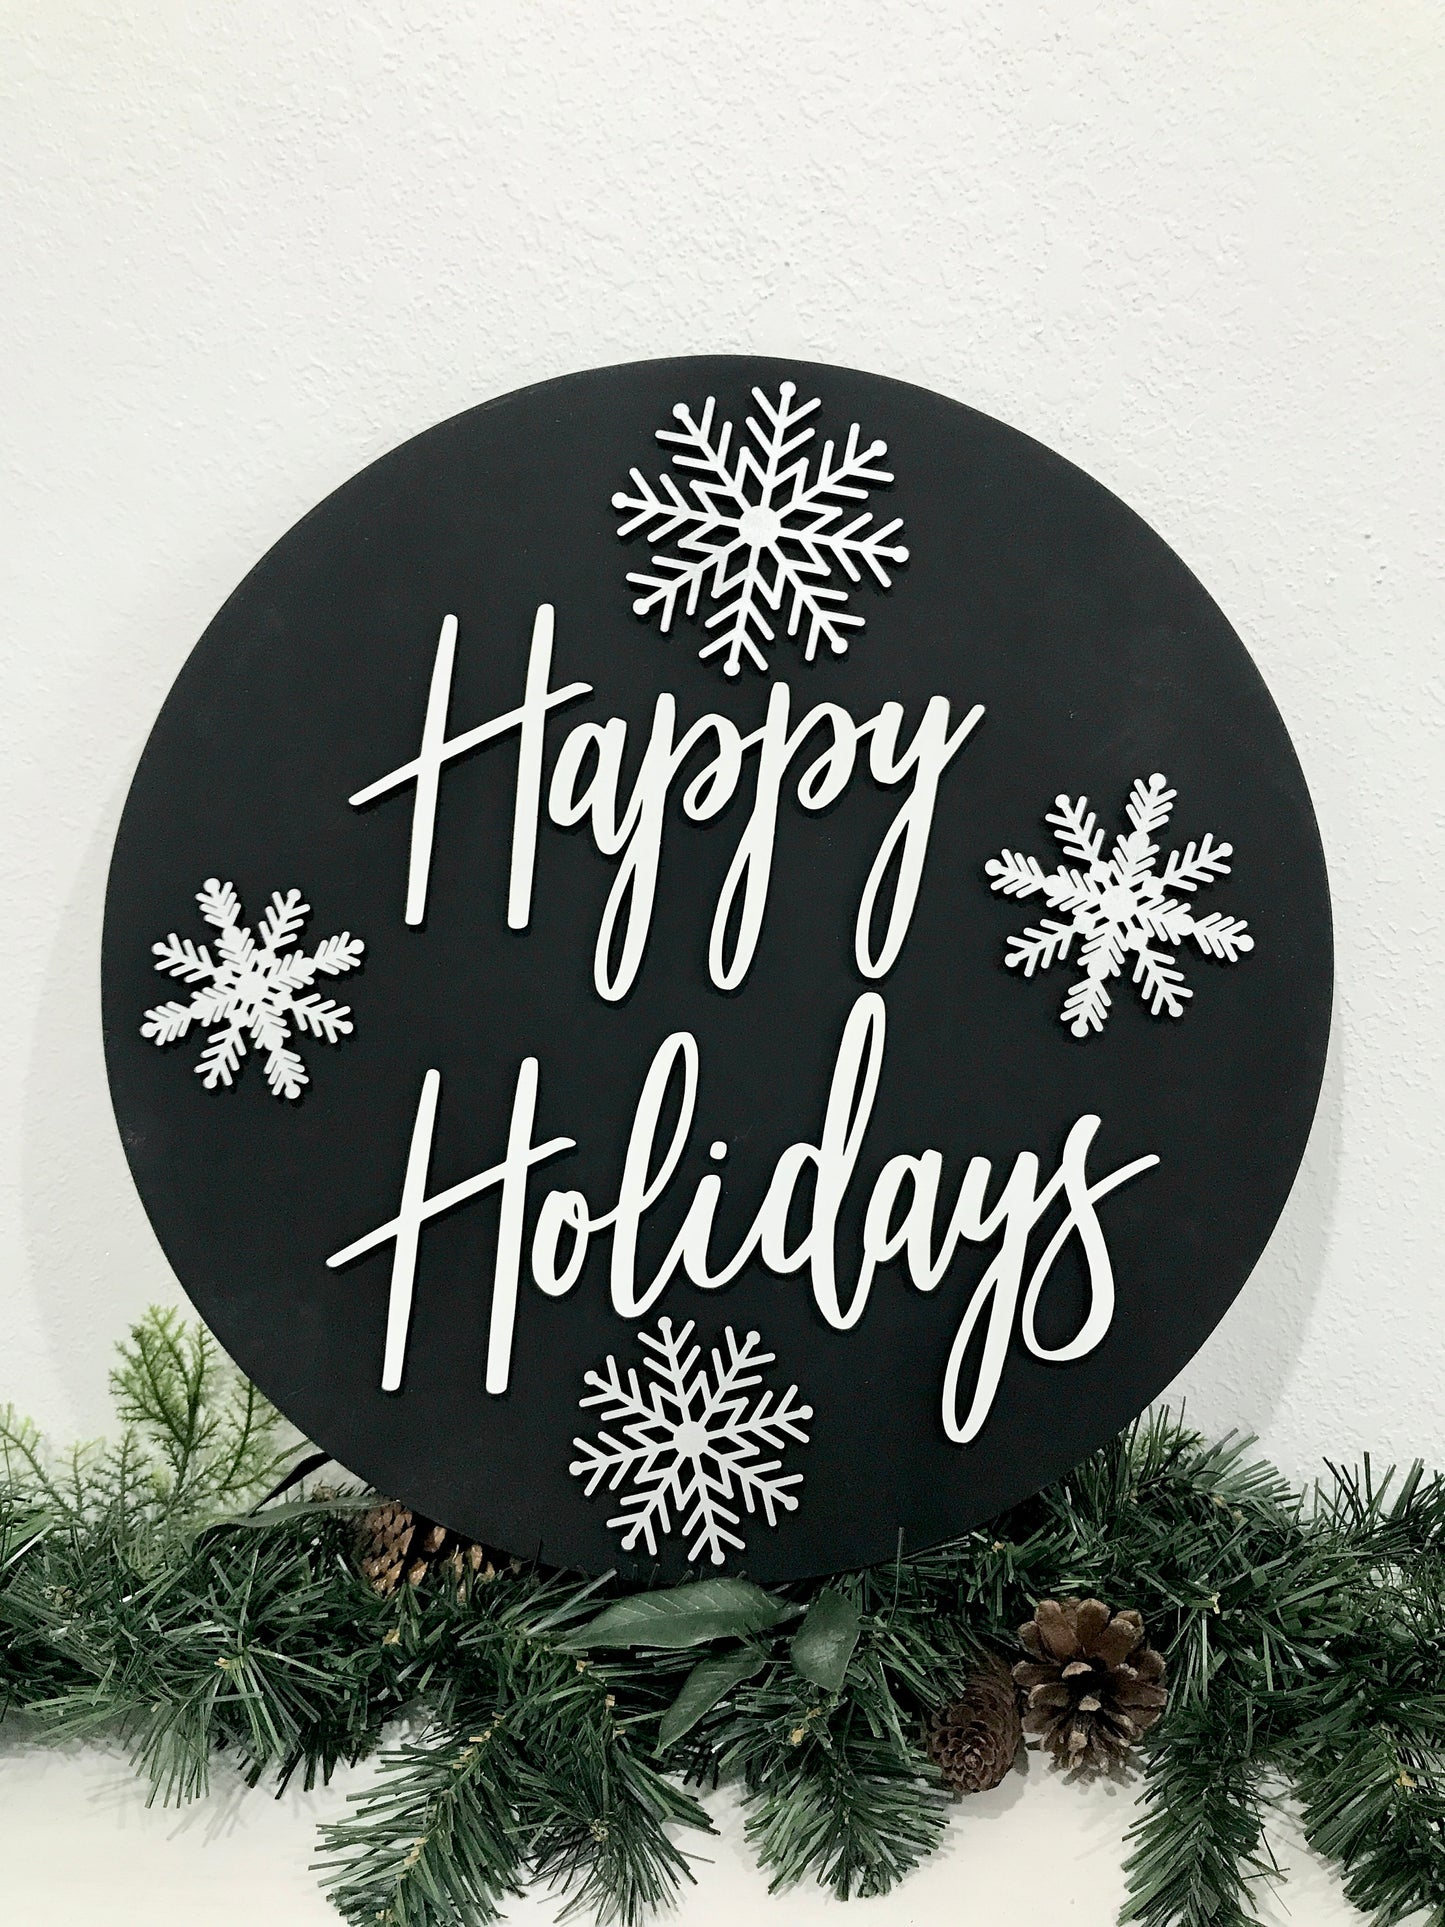 Happy holidays sign, Christmas decorations, 3D holiday decor wood signs, living room wooden sign wall hanging, silver snowflake mantel decor